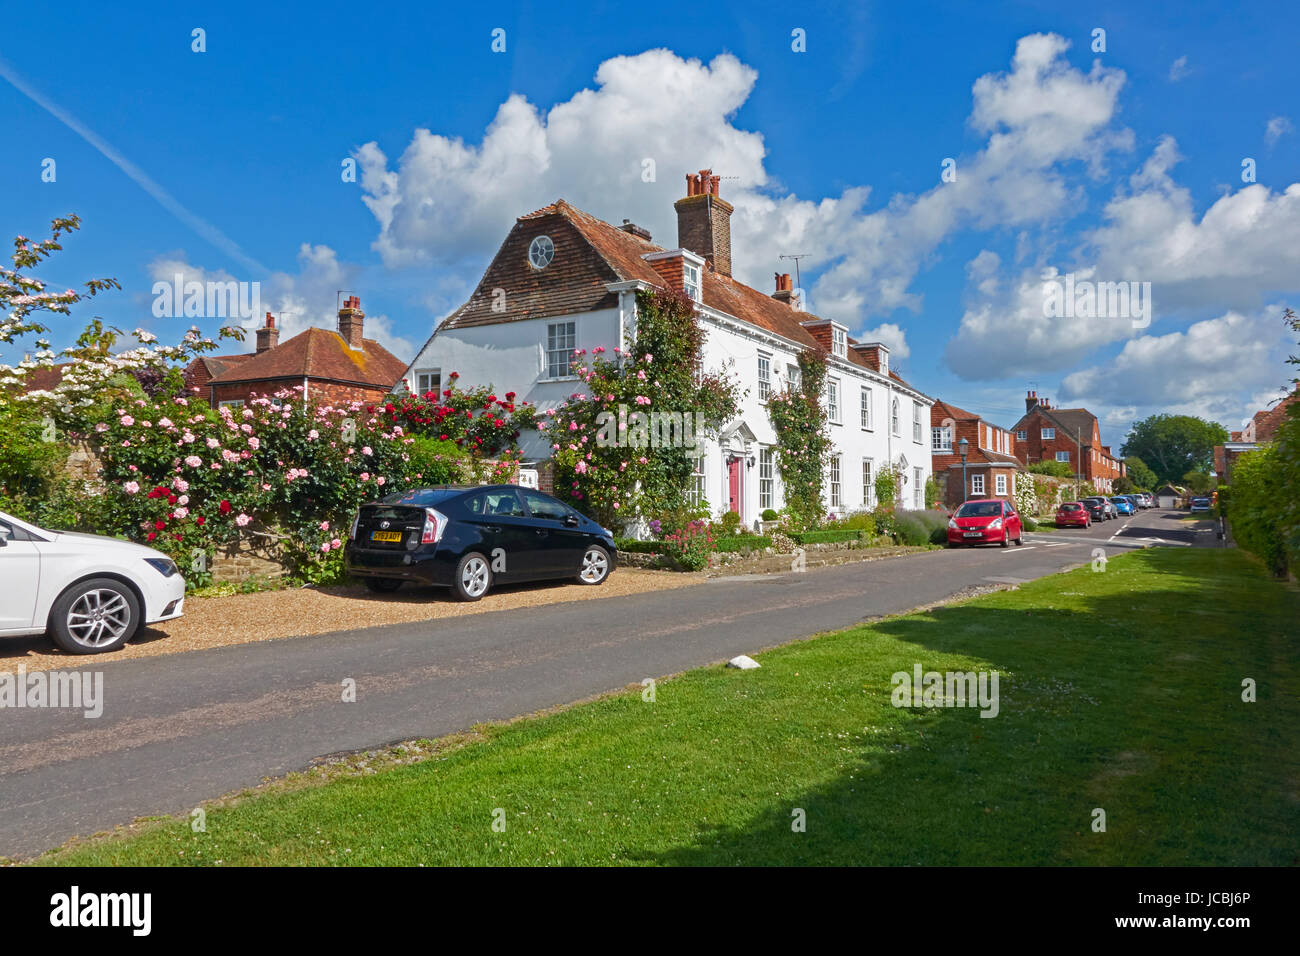 Rookery Lane, in the pretty village of Winchelsea, East Sussex, England, UK, GB Stock Photo